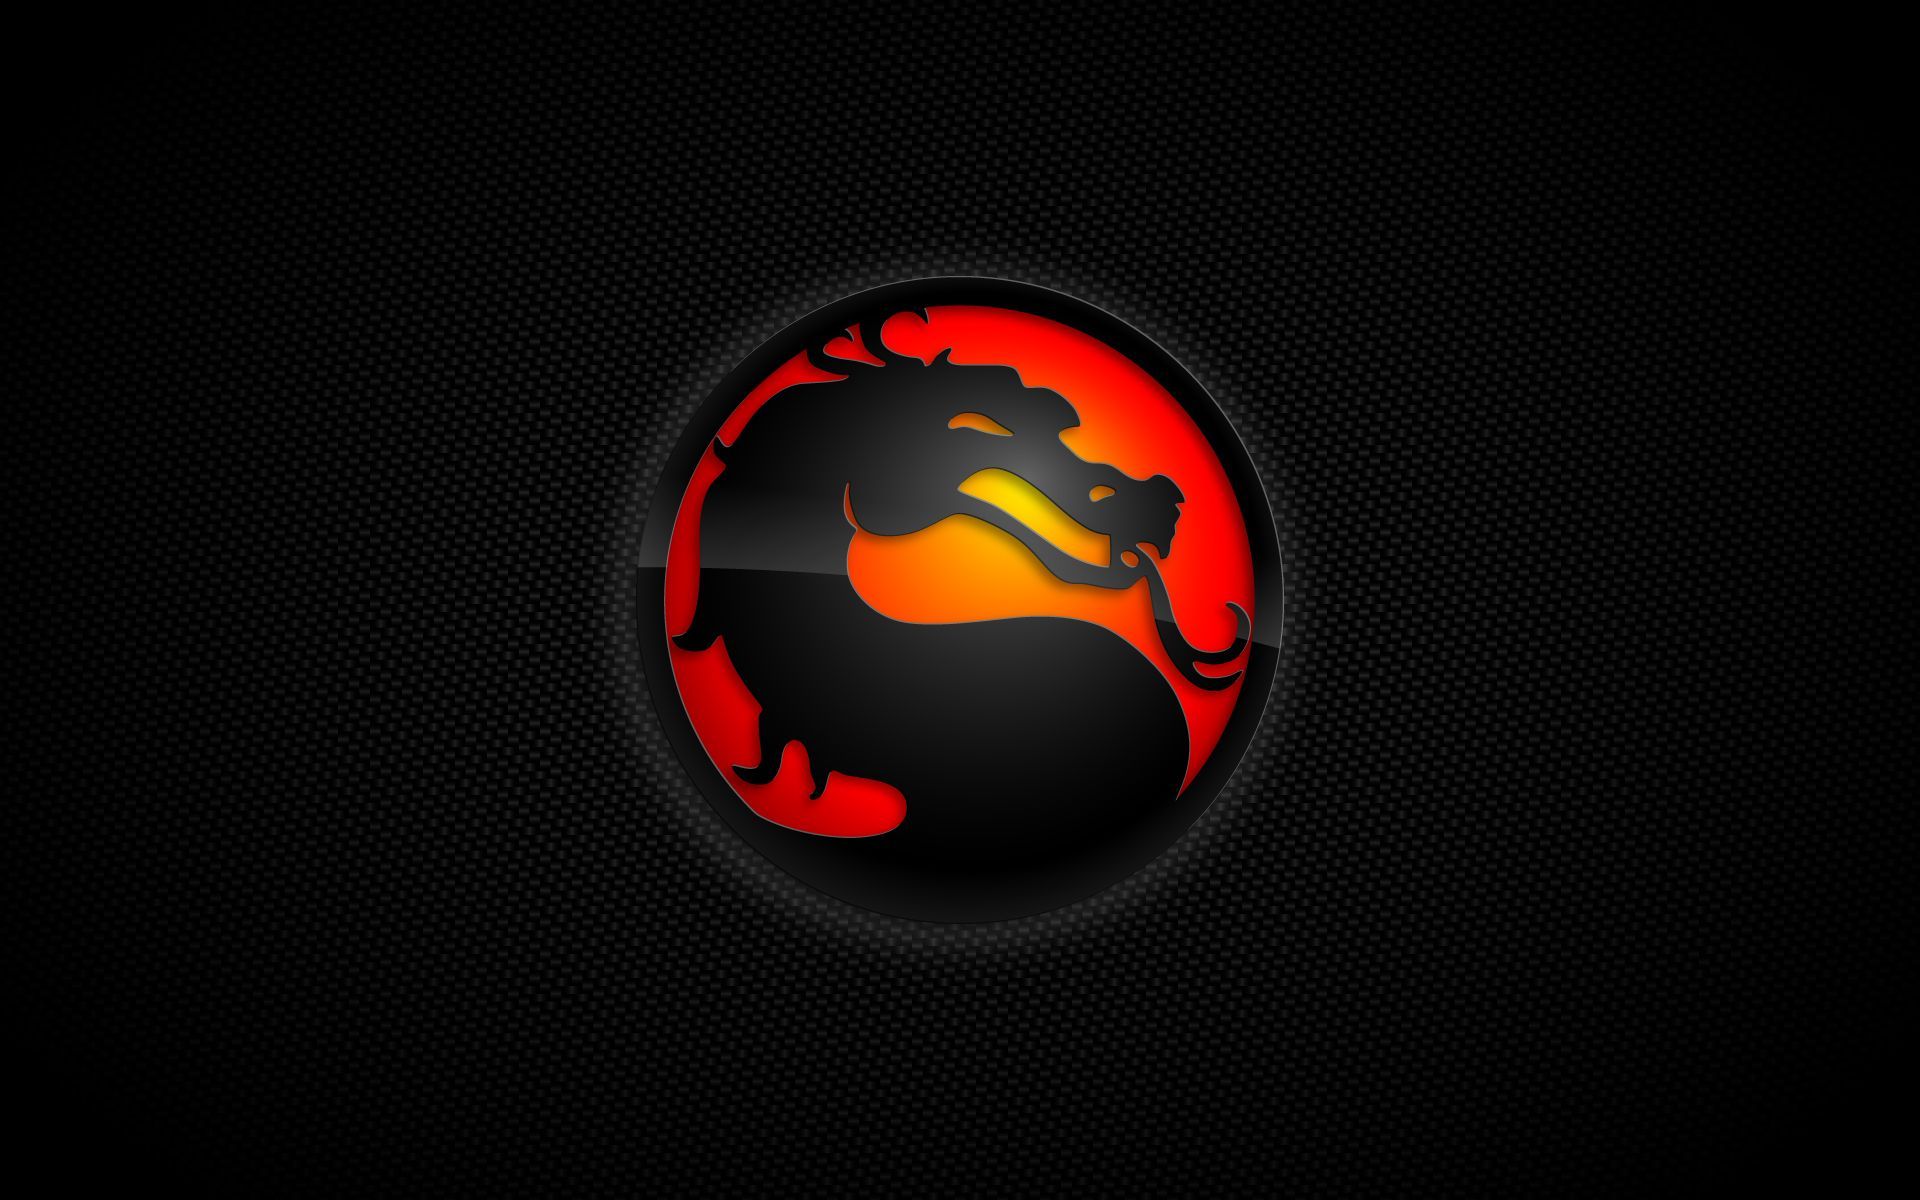 Mortal Kombat HD Wallpapers and Backgrounds